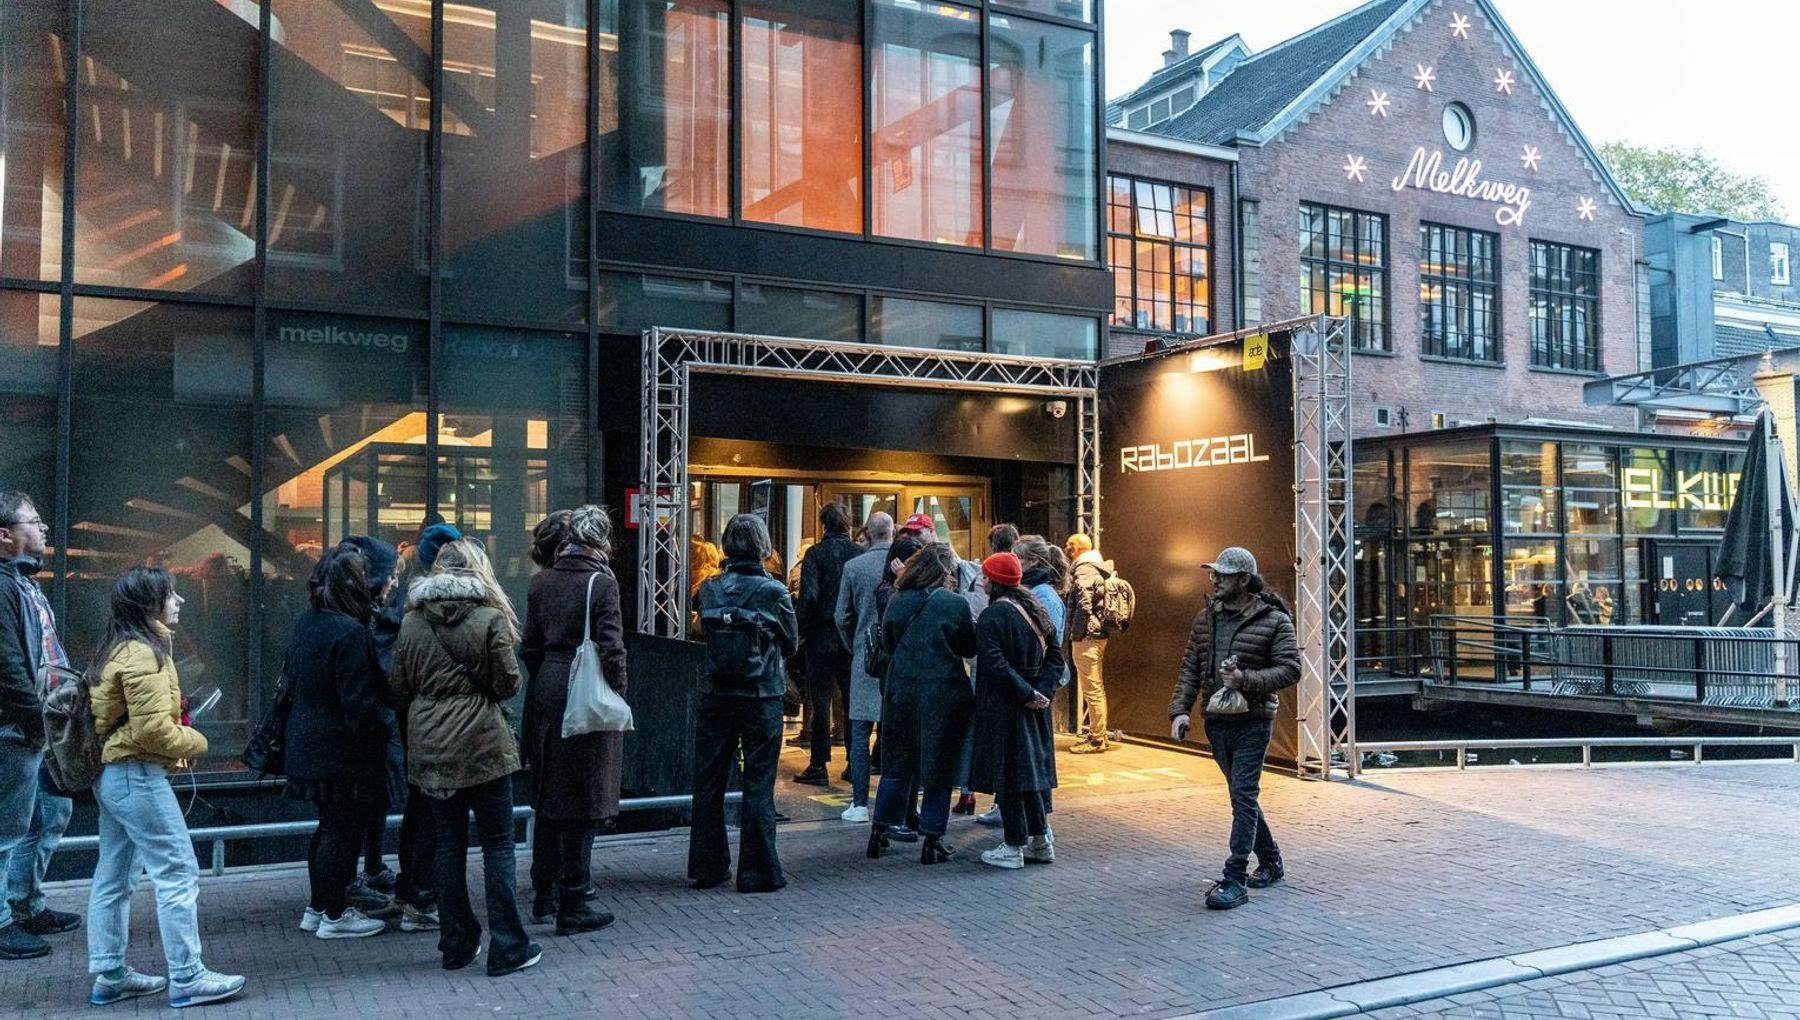 People in line for the Melkweg Rabozaal during Amsterdam Dance Event (ADE) 2022.